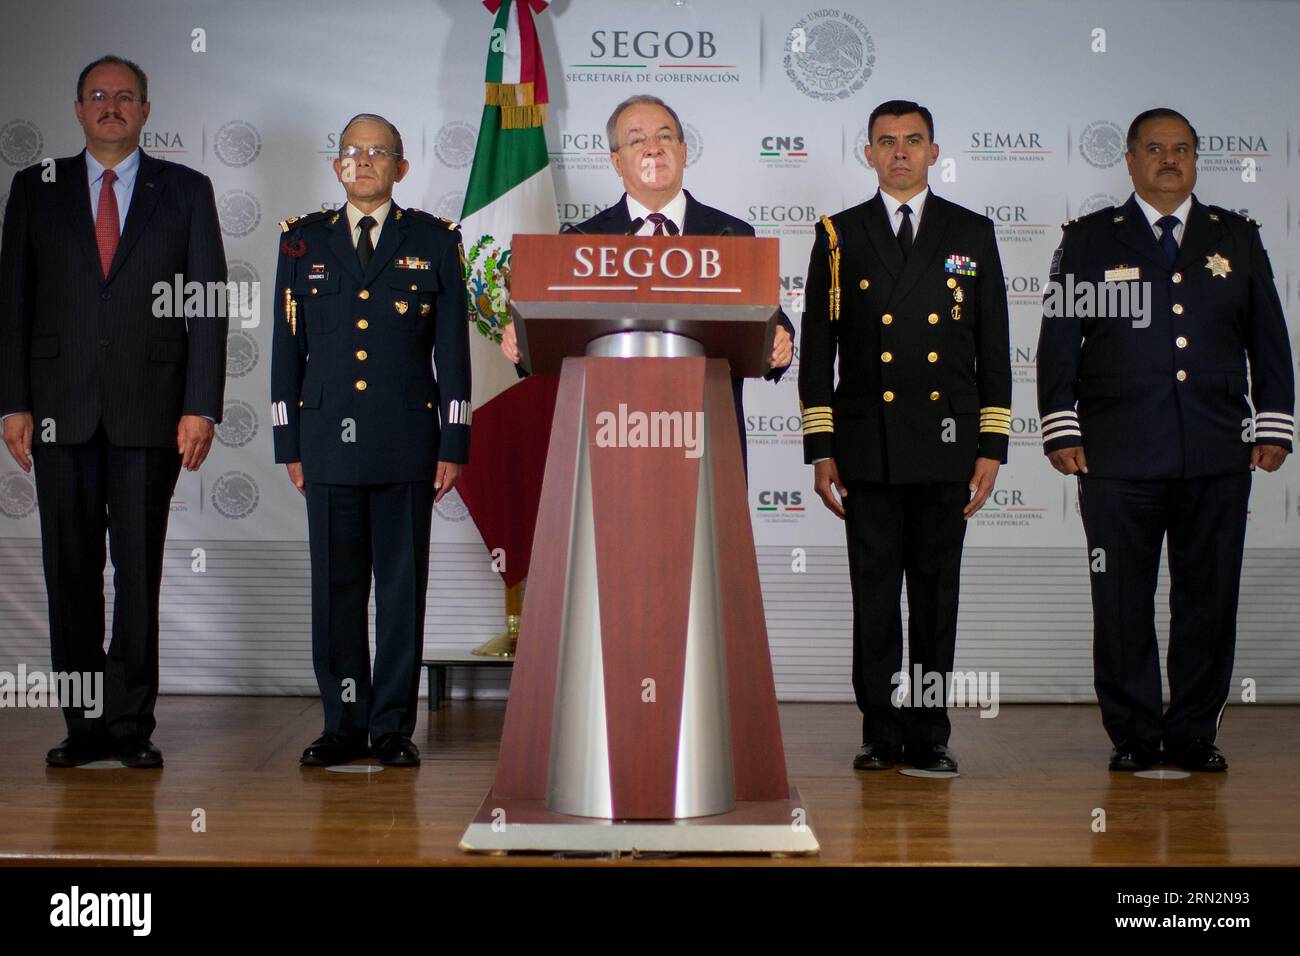 The National Security Comissioner, Monte Alejandro Rubido(C), takes part in a press conference about the detention of Daniel Menera Sierra and Octavio Gomez Gomez, alleged operators of the criminal organization Los Zetas , in the headquarters of the Secretariat of Interior (SEGOB, for its acronym in Spanish), in Mexico City, capital of Mexico, on March 16, 2015. Pedro Mera) (jp) MEXICO-MEXICO CITY-SECURITY-DETENTION e PedroxMera PUBLICATIONxNOTxINxCHN   The National Security Comissioner Monte Alejandro  C Takes Part in a Press Conference About The Detention of Daniel  Sierra and Octavio Gomez Stock Photo